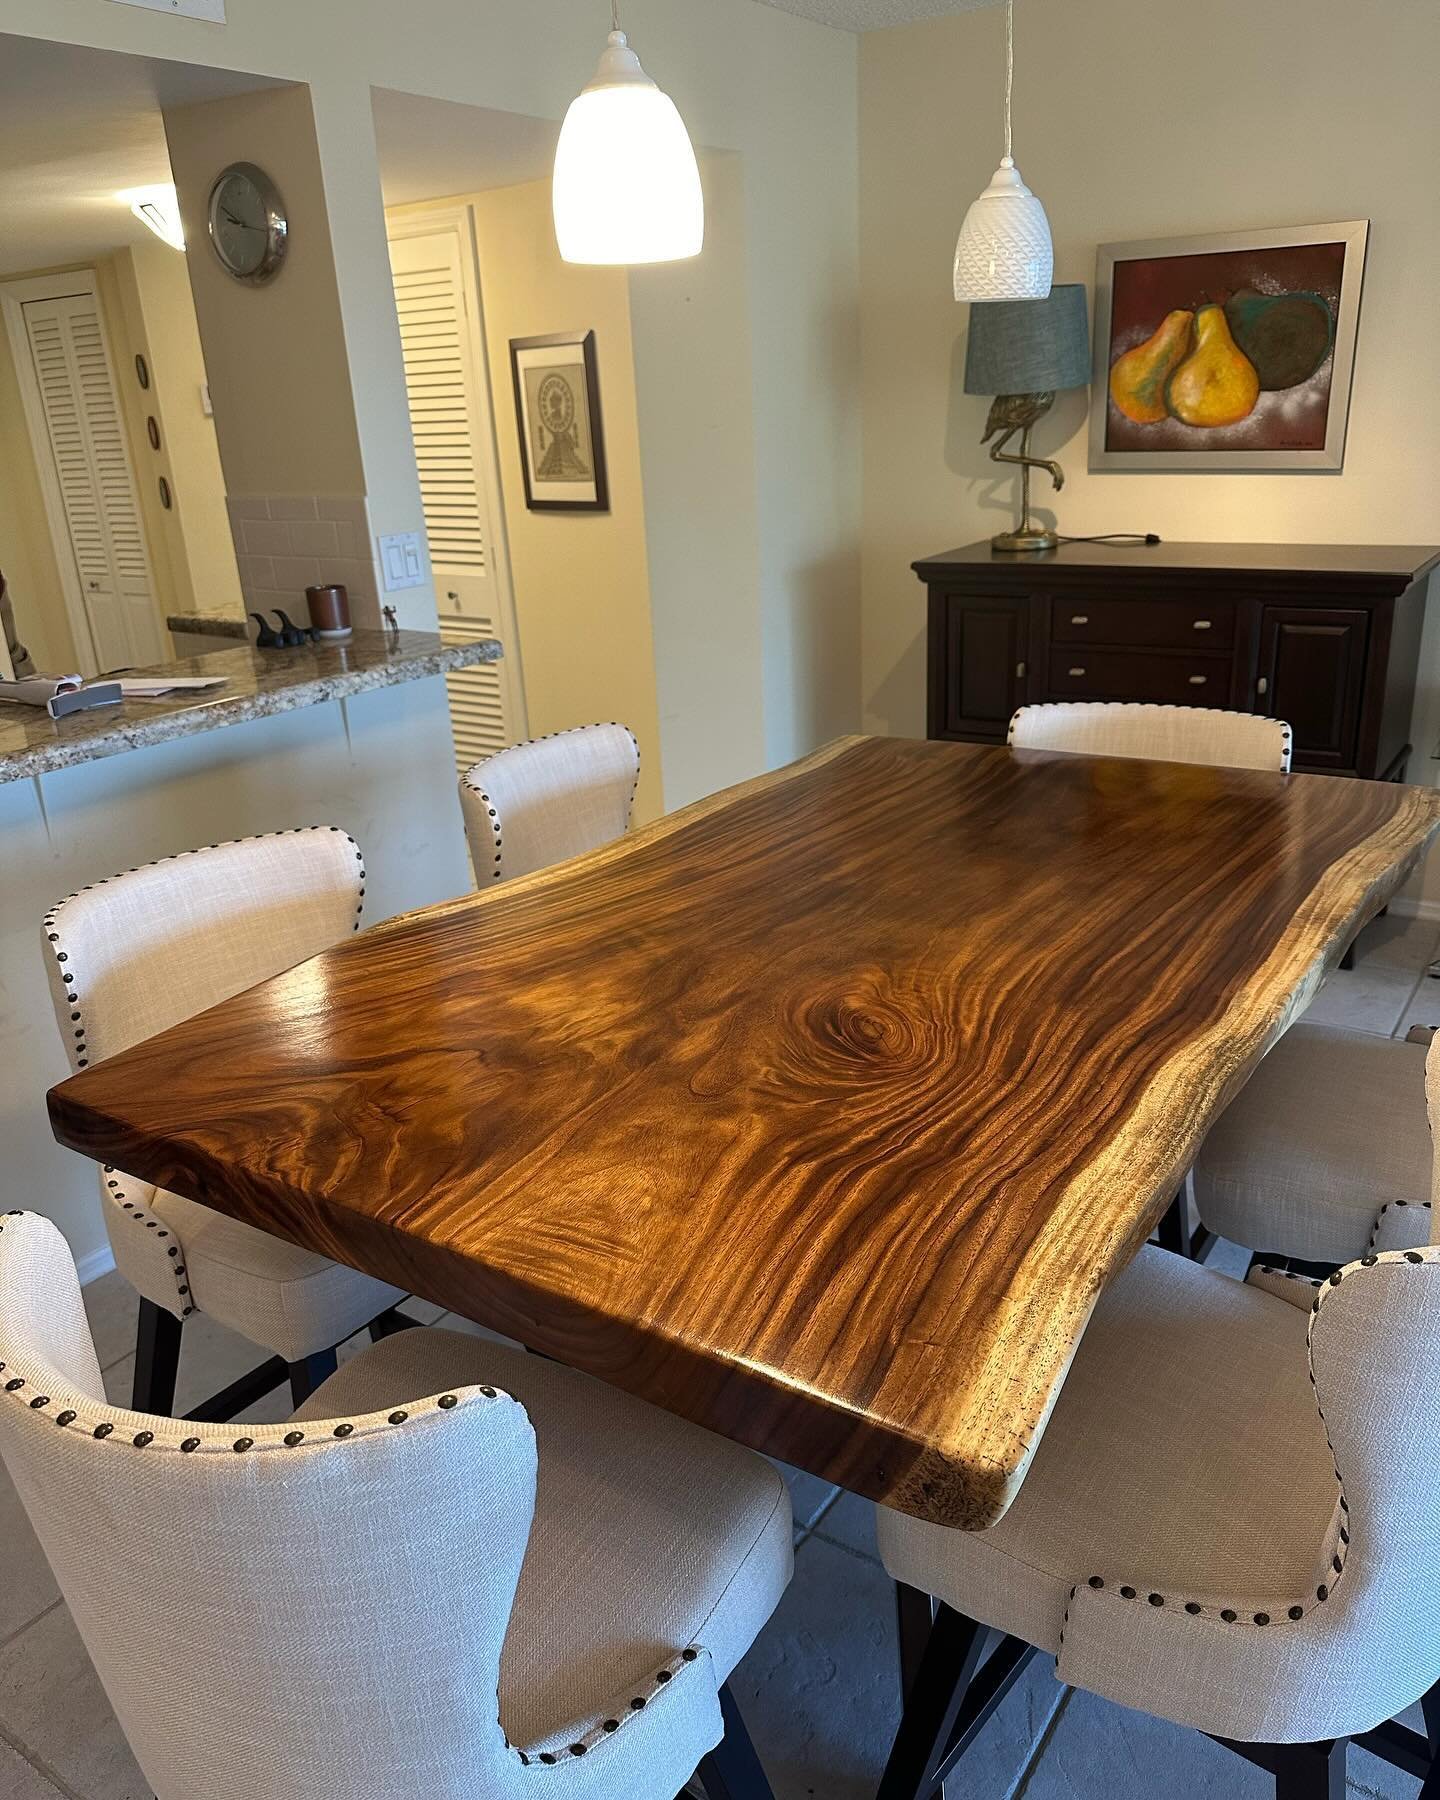 Stunning high-top table designed to bring warmth to this space. The natural beauty of the wood grain shines through. Perfect for gathering and making memories. Swipe to see before and after ⬅️

#monkeypod #liveedge #stunning #homedecor #diningroom #c